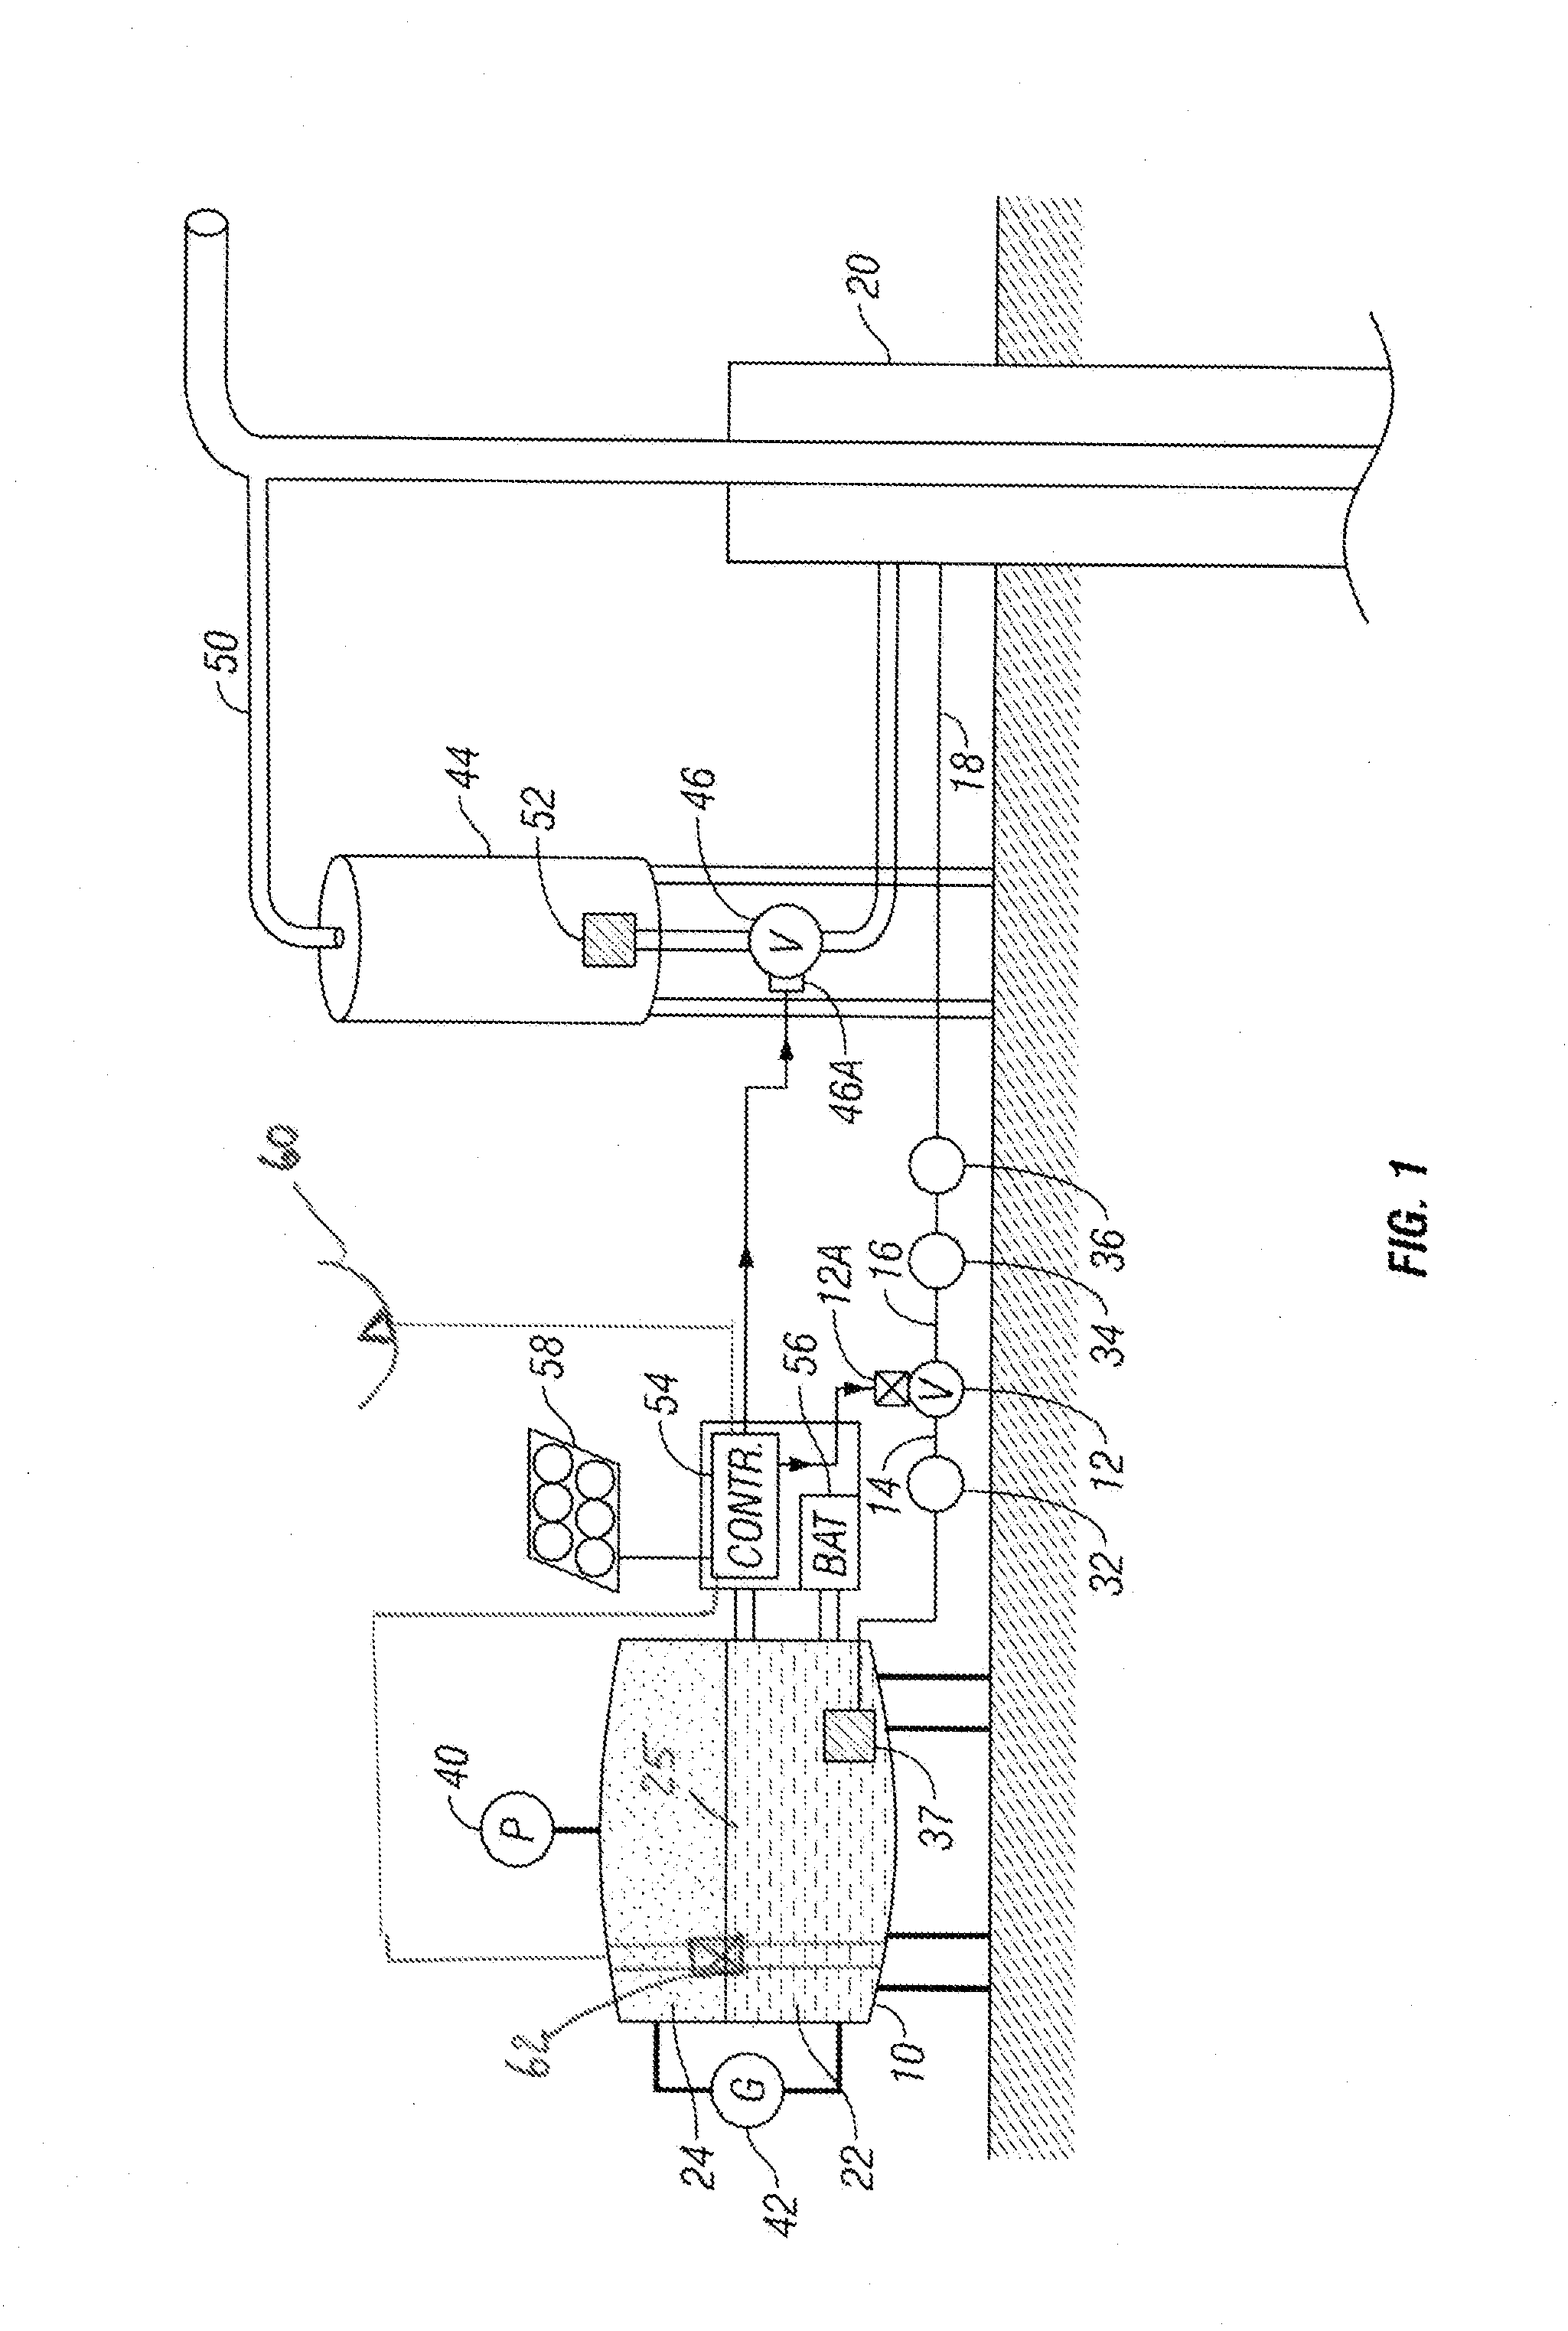 Automatic chemical treatment system with liquid level sensor in chemical tank for calibration and chemical dispensing rate control